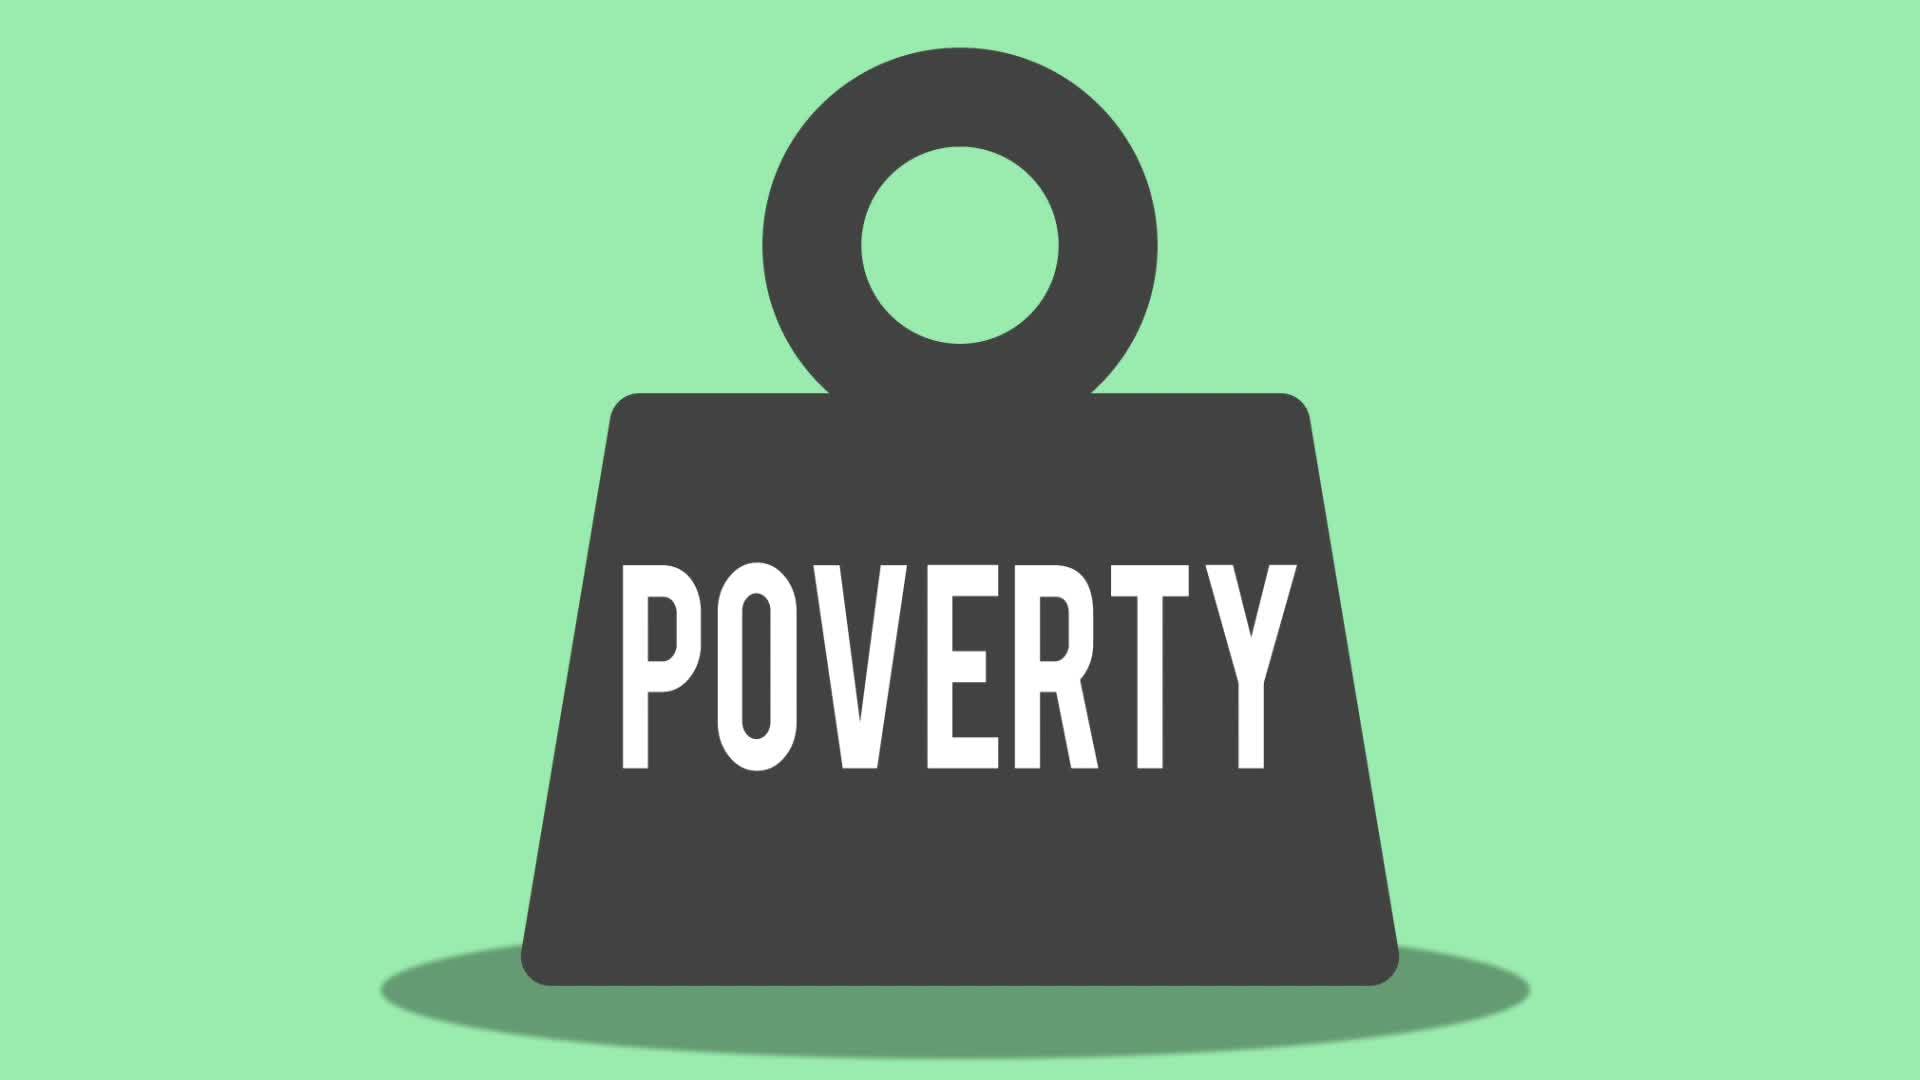 UN Global Goal 1: No Poverty (Ages 11 - 17)